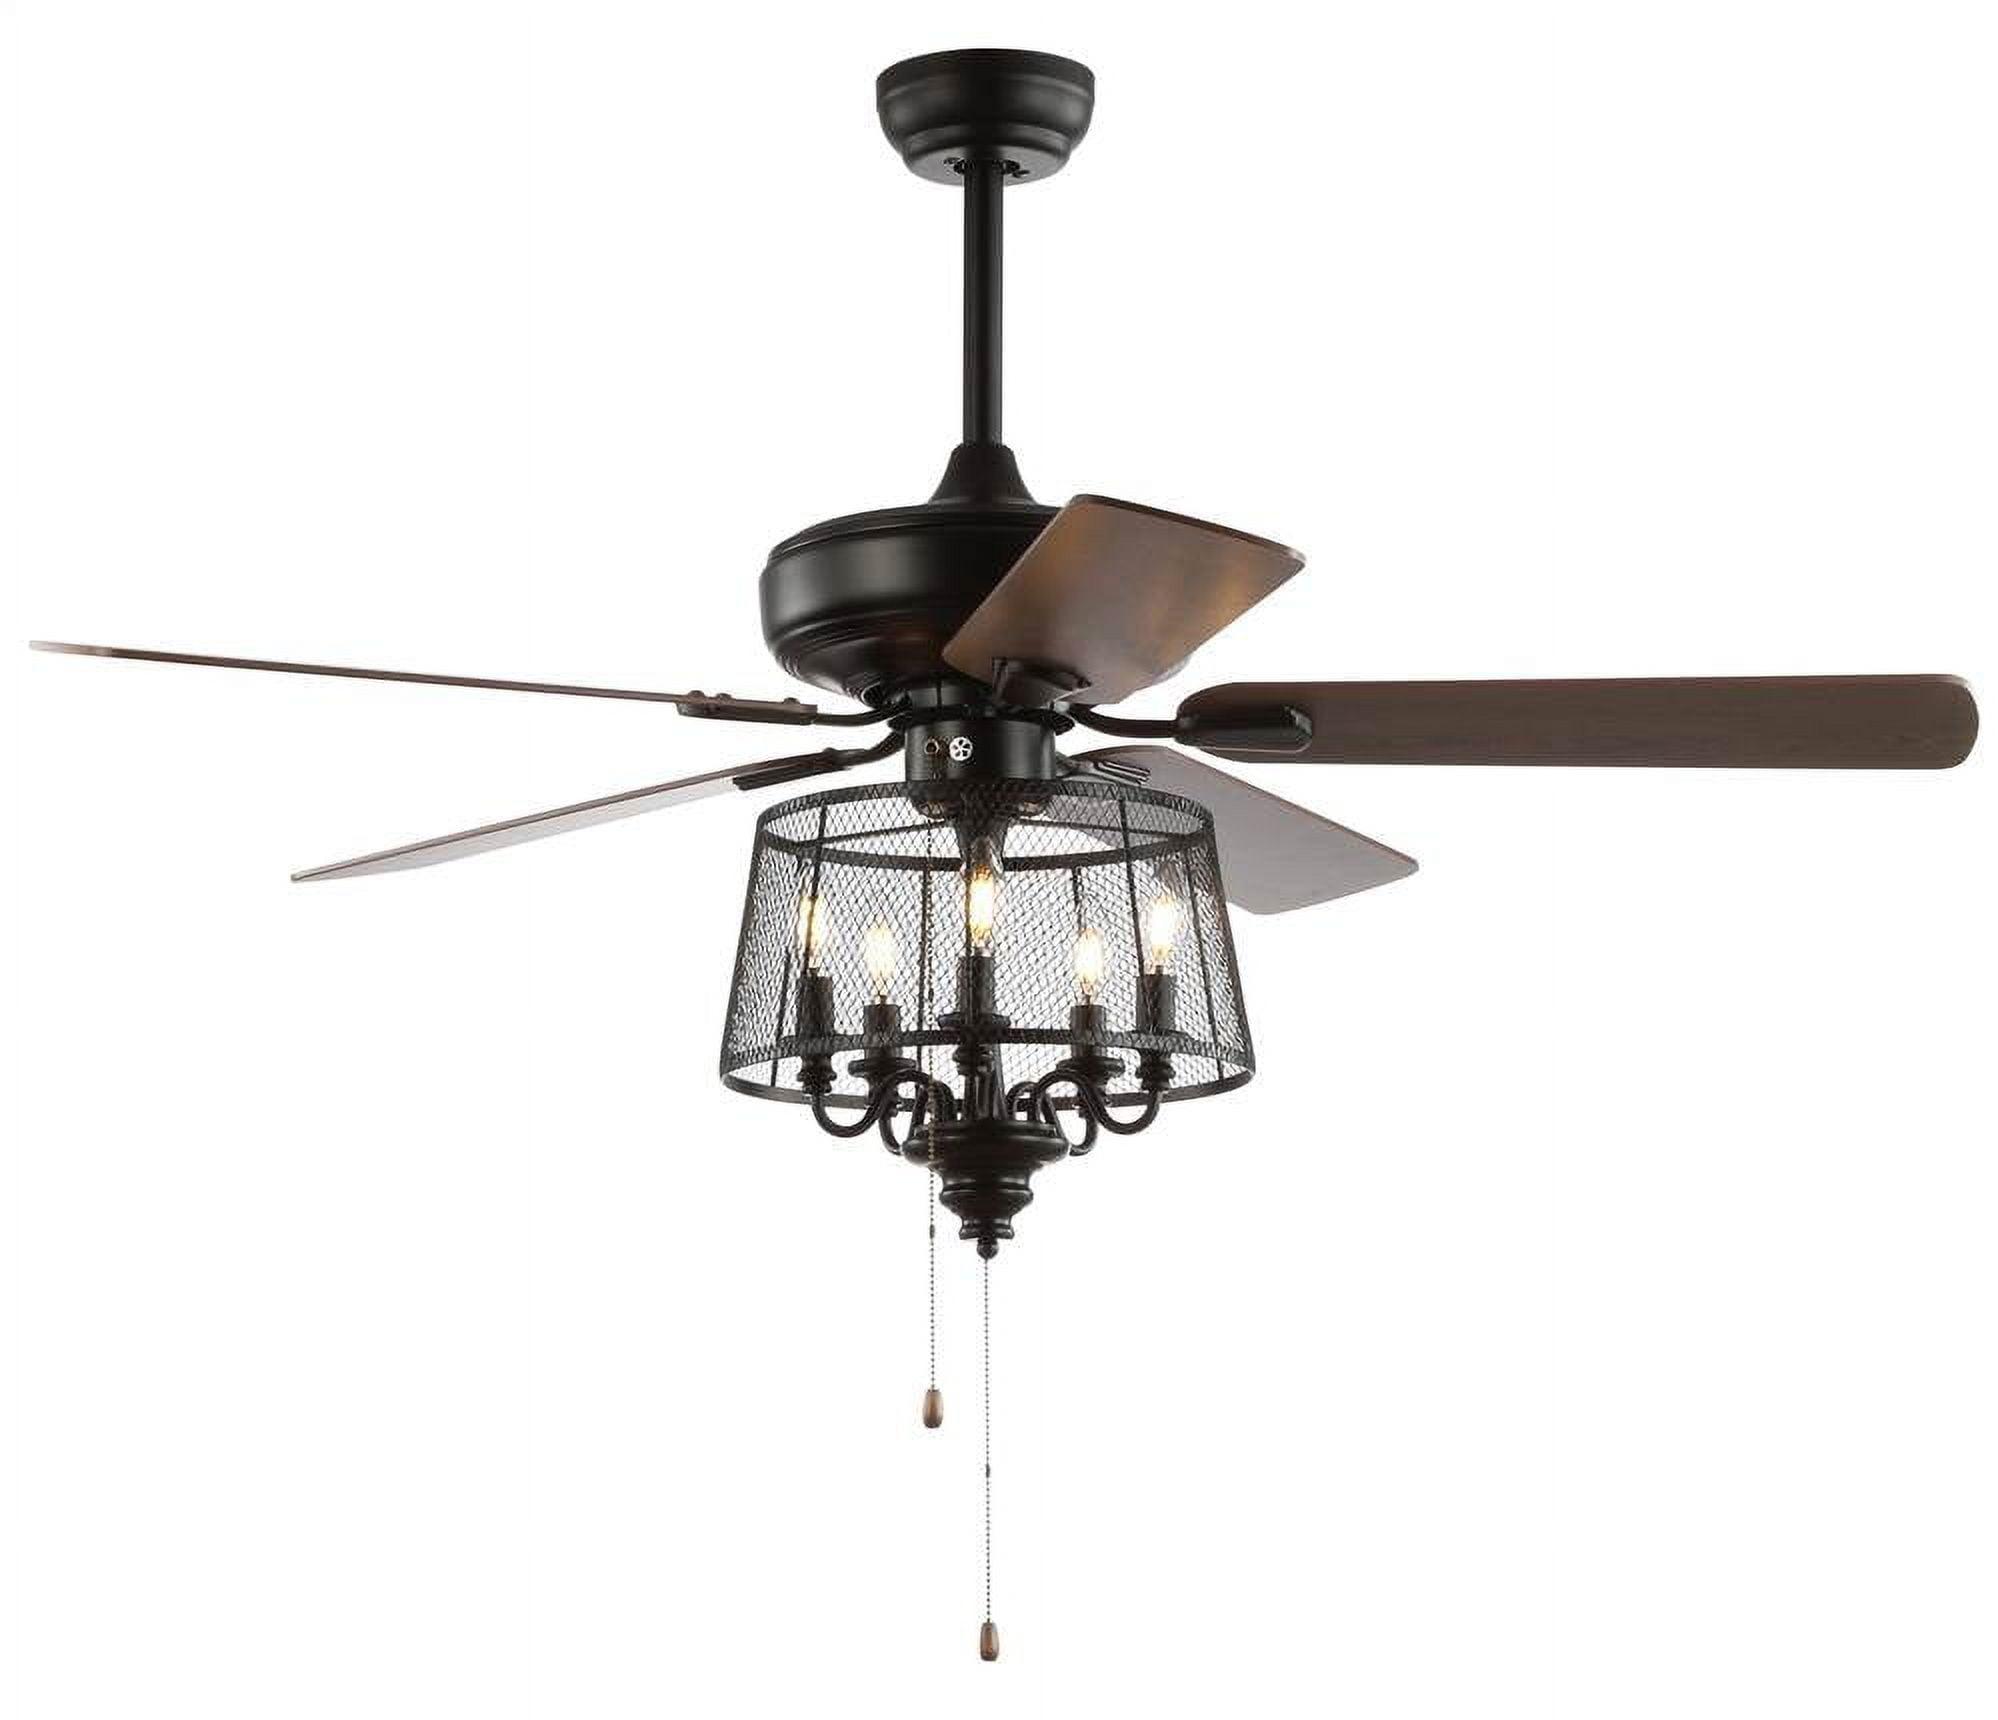 Matte Black 52" Iron Ceiling Fan with Reversible Blades and Lighting